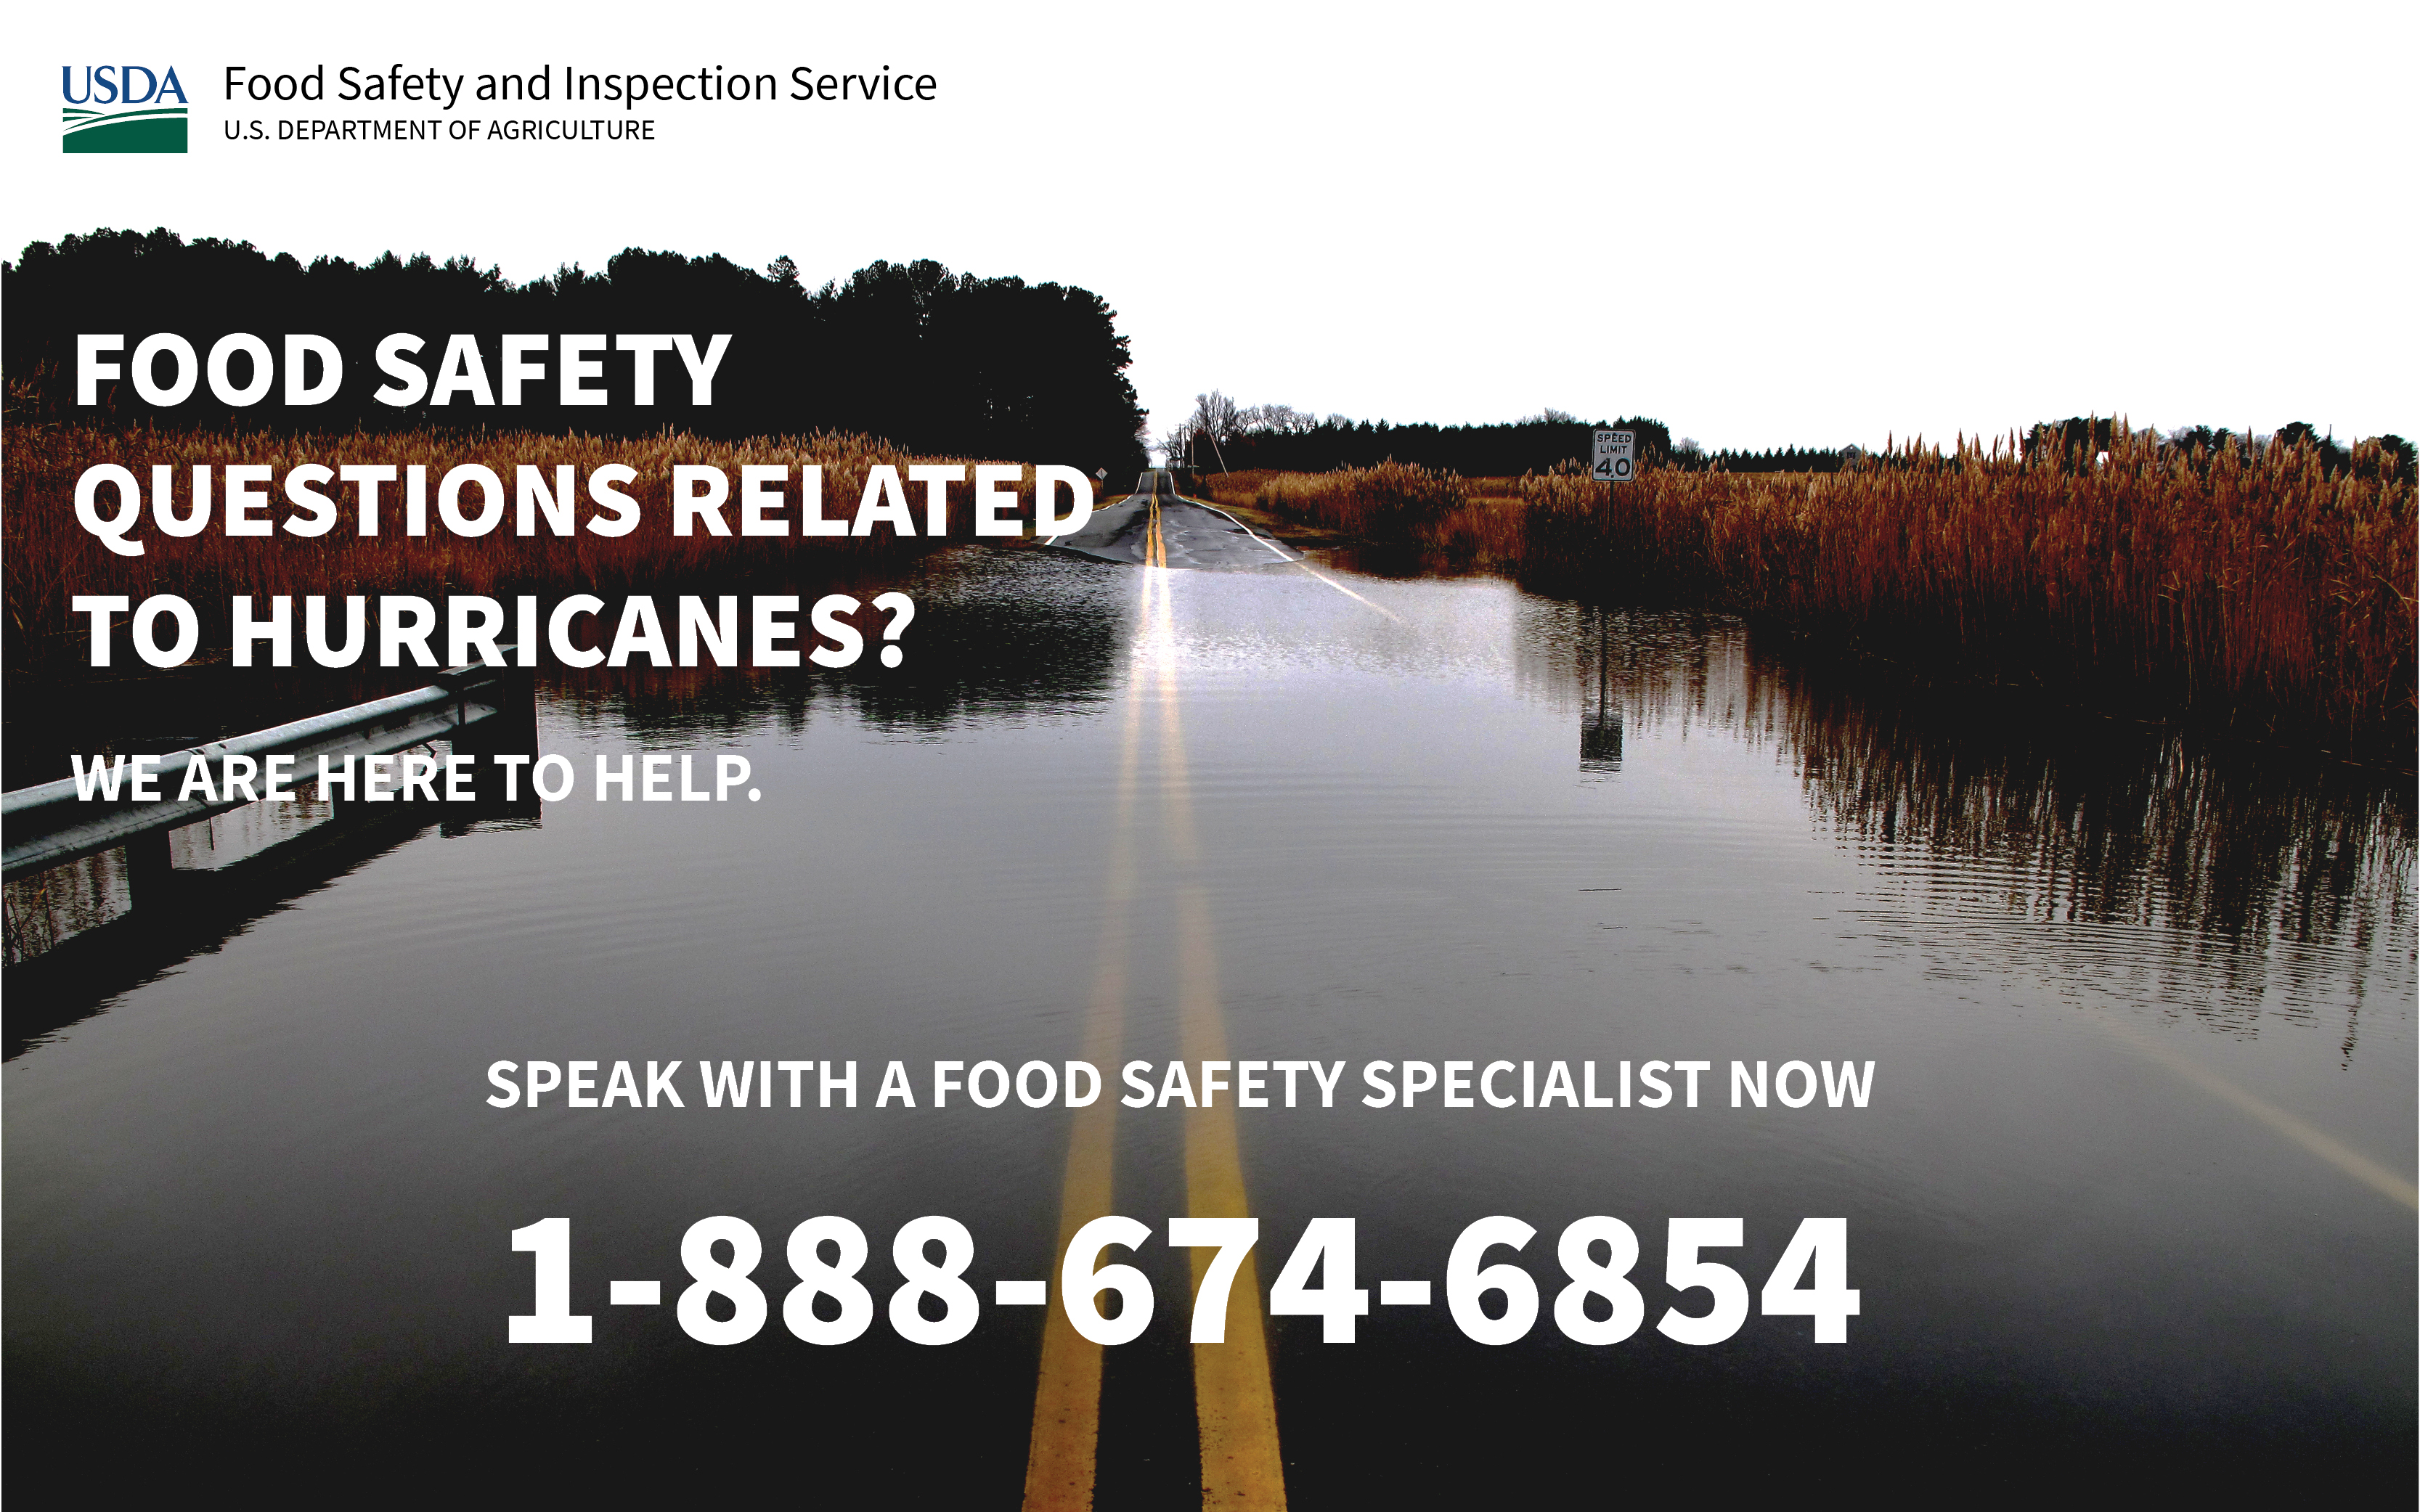 An image of a flooded road with the text "Food Safety Questions Related to Hurricanes? We are here to help. Speak with a food safety specialist now 1-888-674-6854." The image also has USDA's Food Safety and Inspection Service logo in the upper left corner.